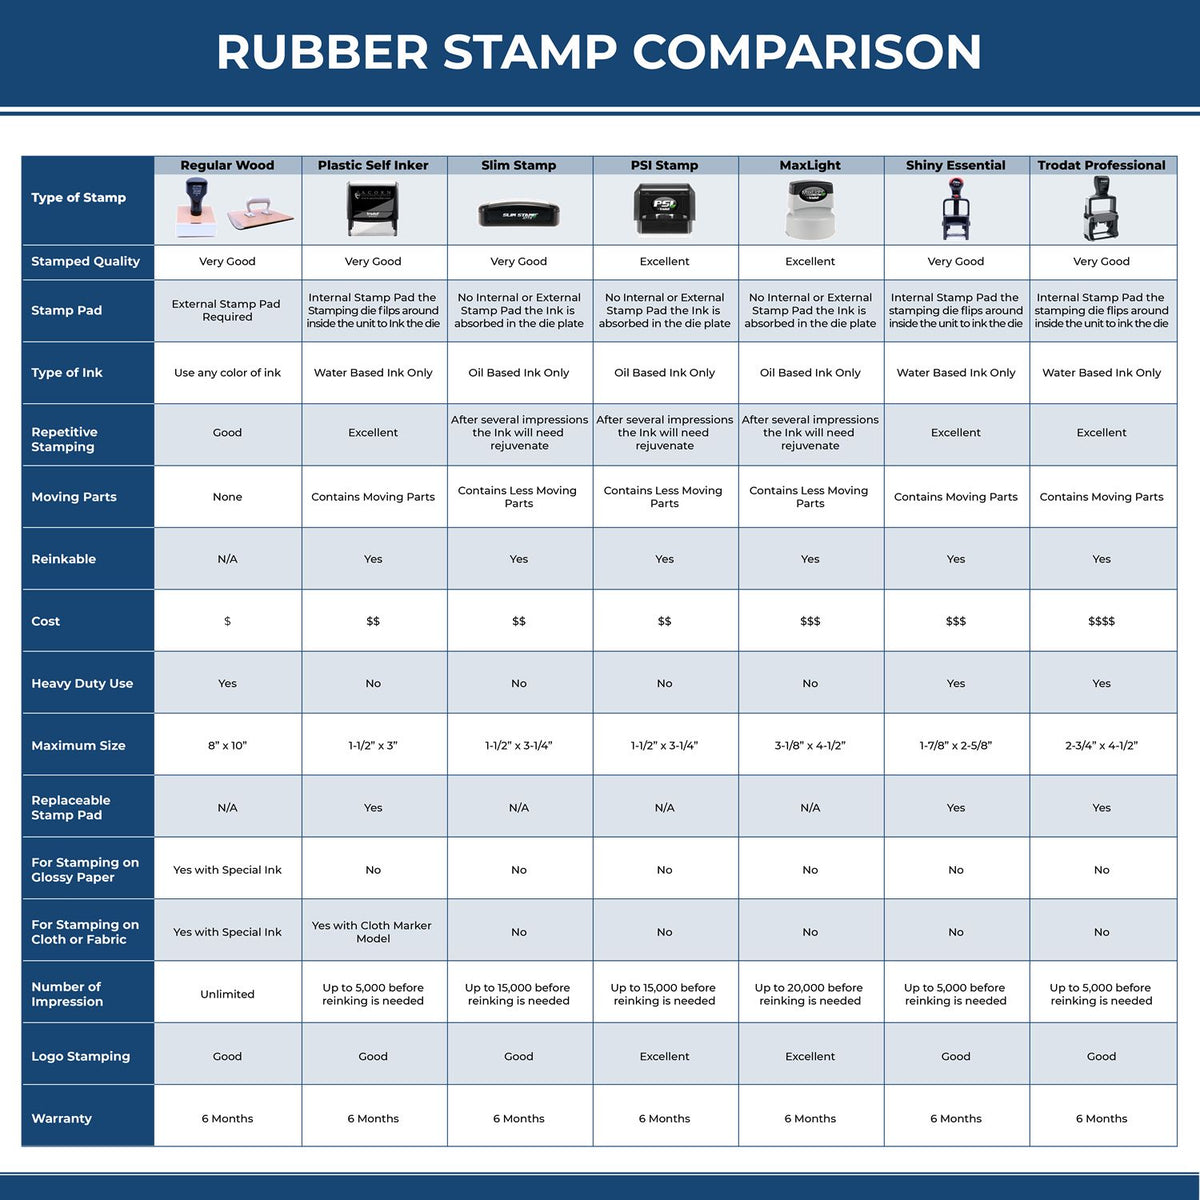 A comparison chart for the different types of mount models available for the Premium MaxLight Pre-Inked Arizona Landscape Architectural Stamp.